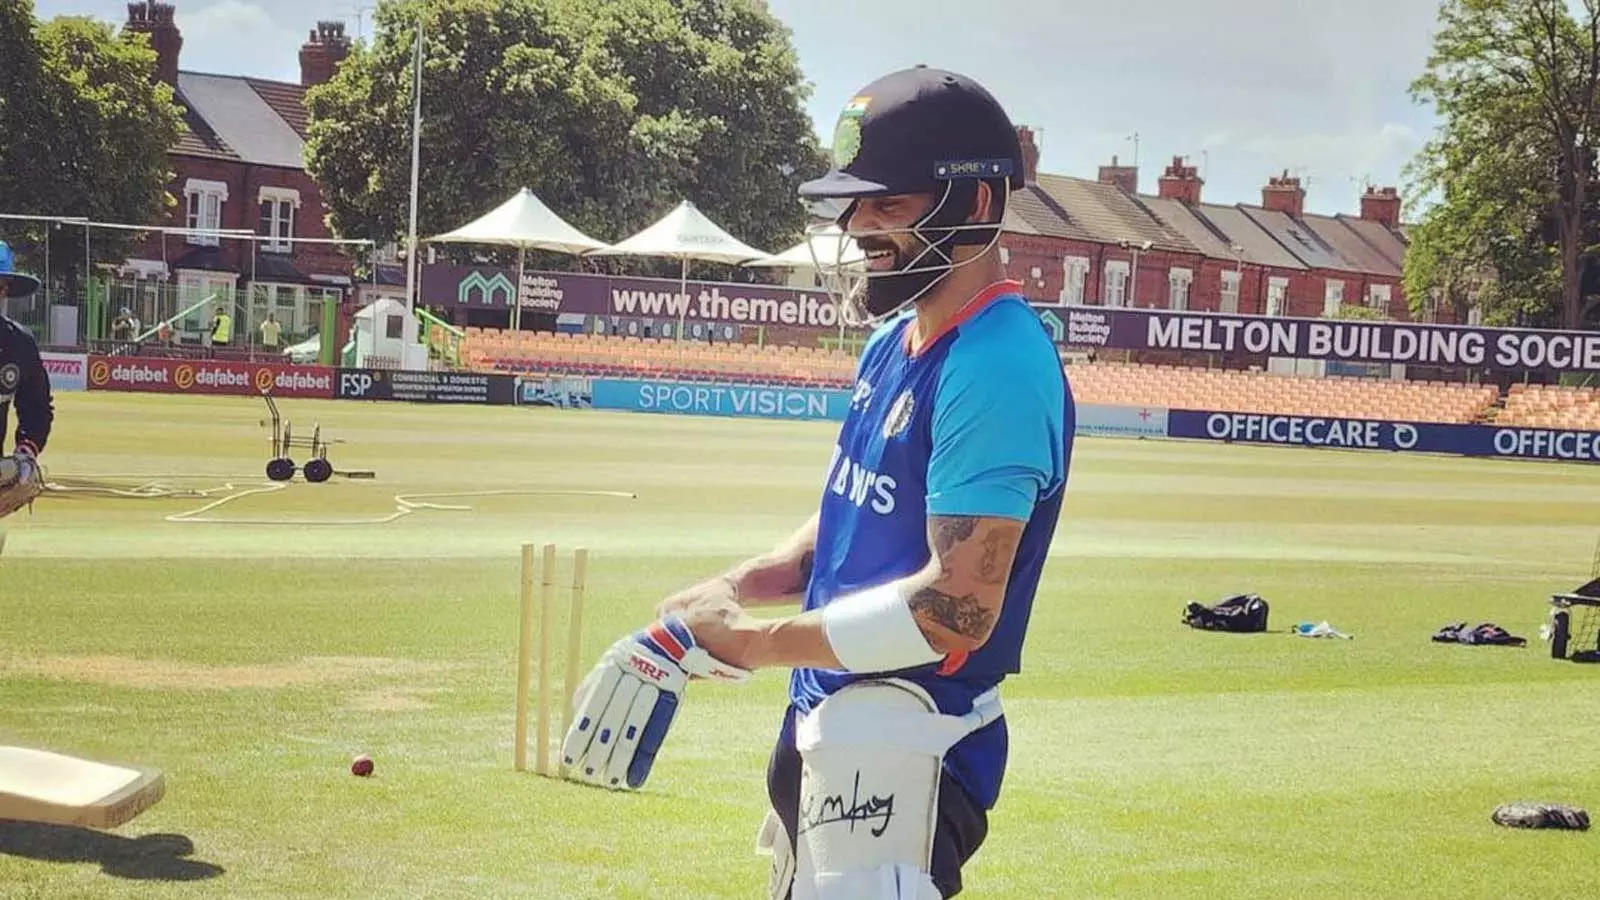 Virat Kohli has reportedly tested positive for Covid-19